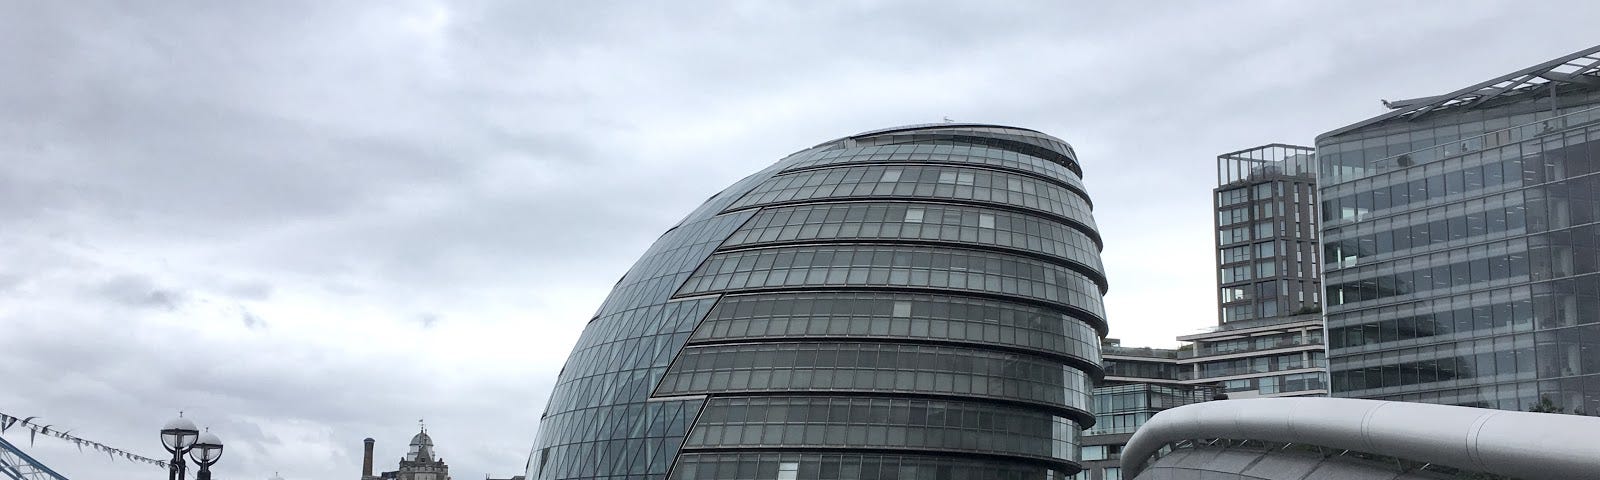 LOTI meets with the Greater London Authority to discuss data analytics and information governance.